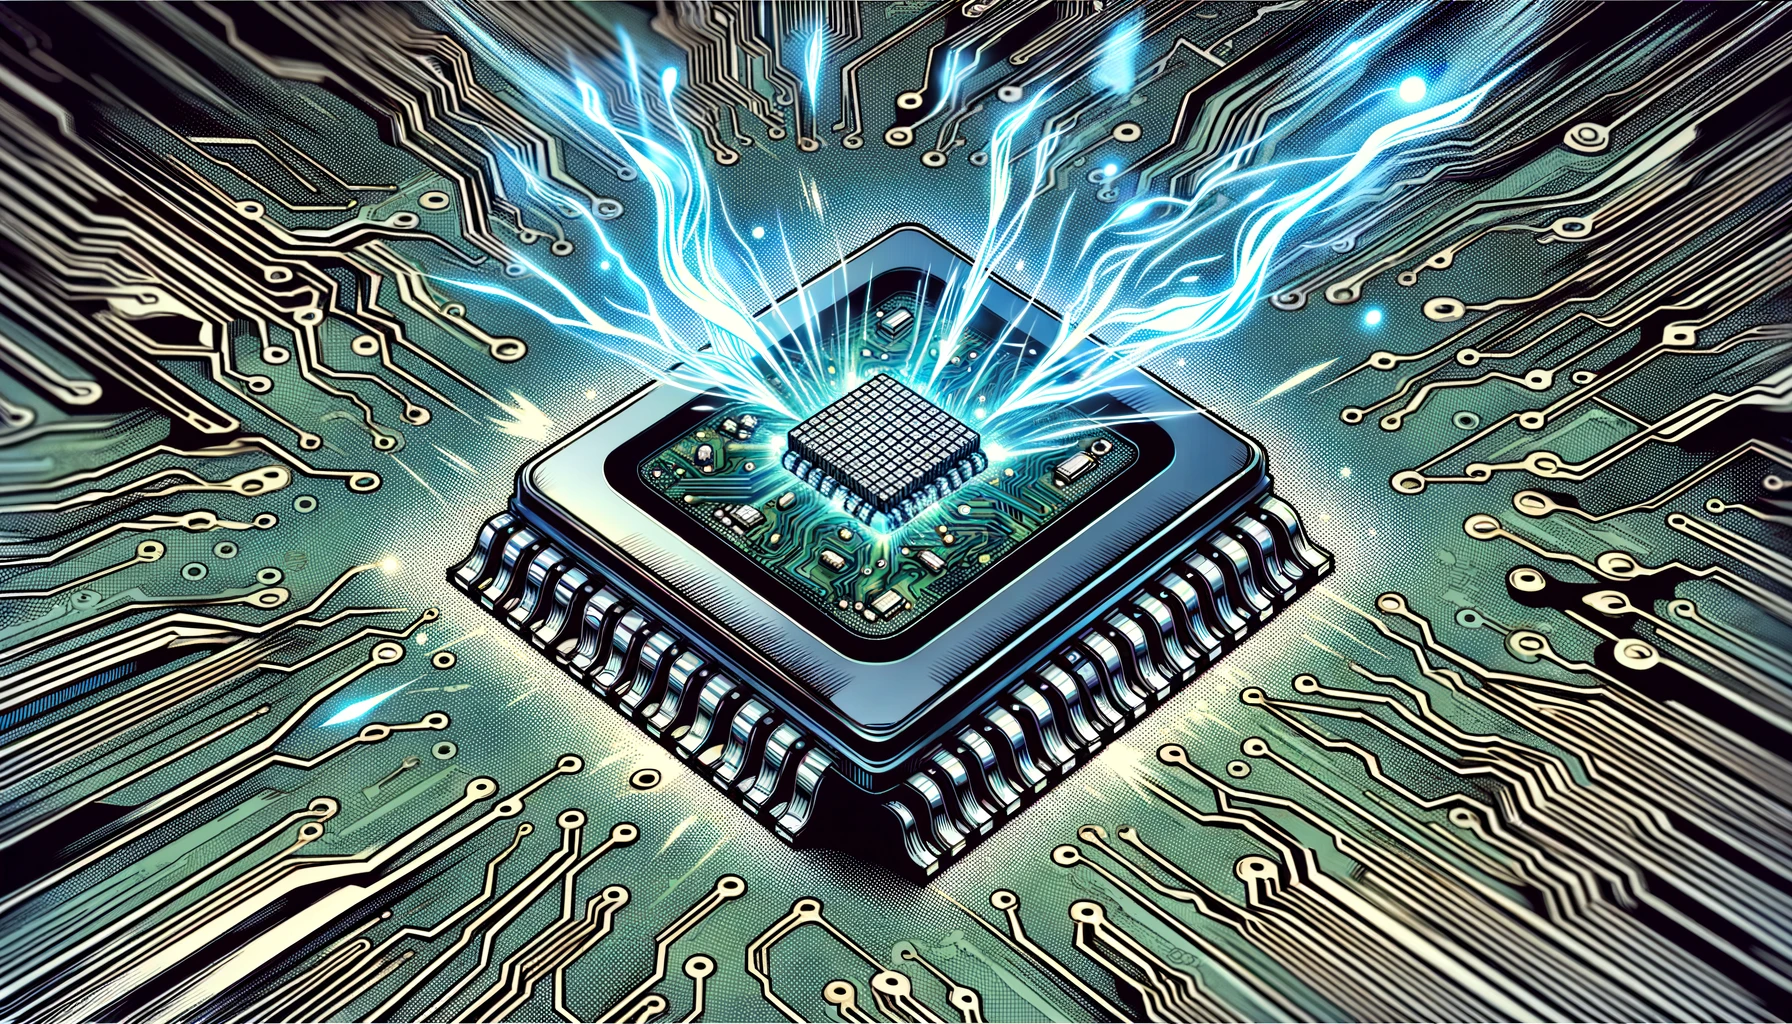 Groundbreaking microcapacitors could power chips of the future